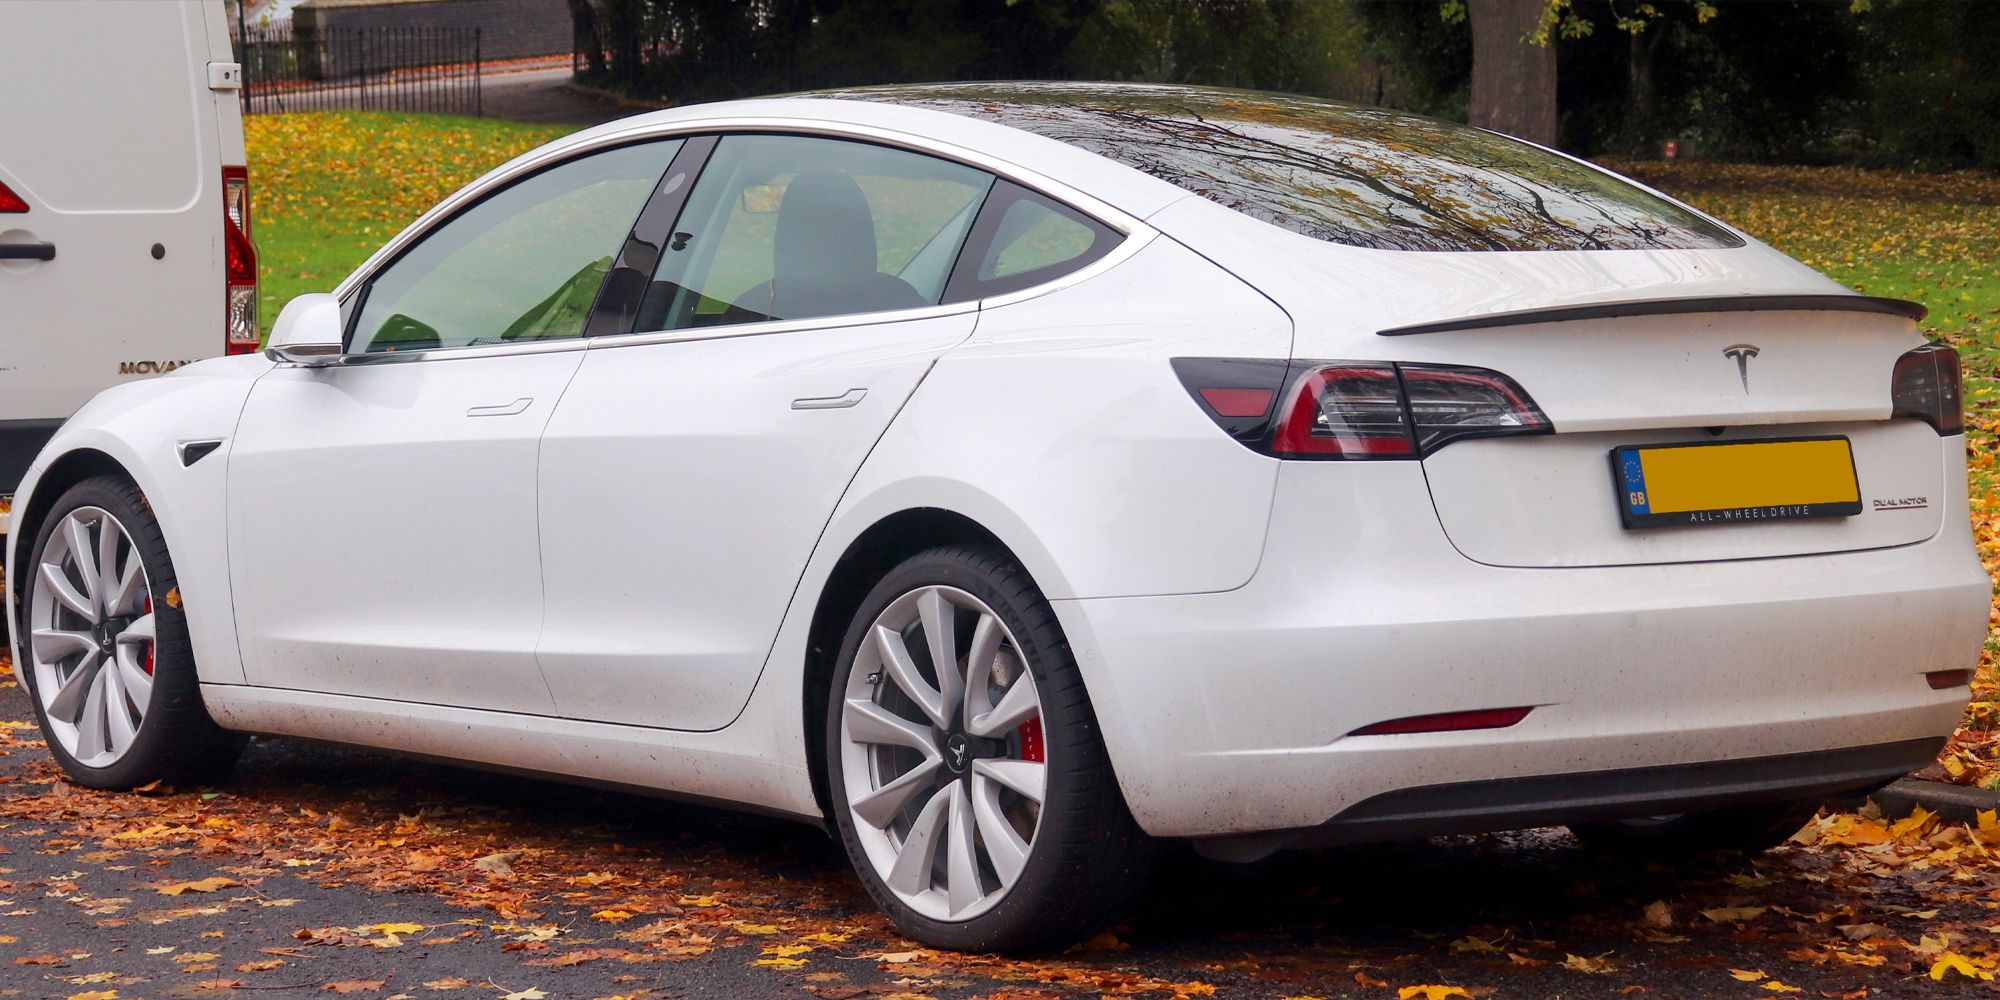 Rear 3/4 view of the Model 3